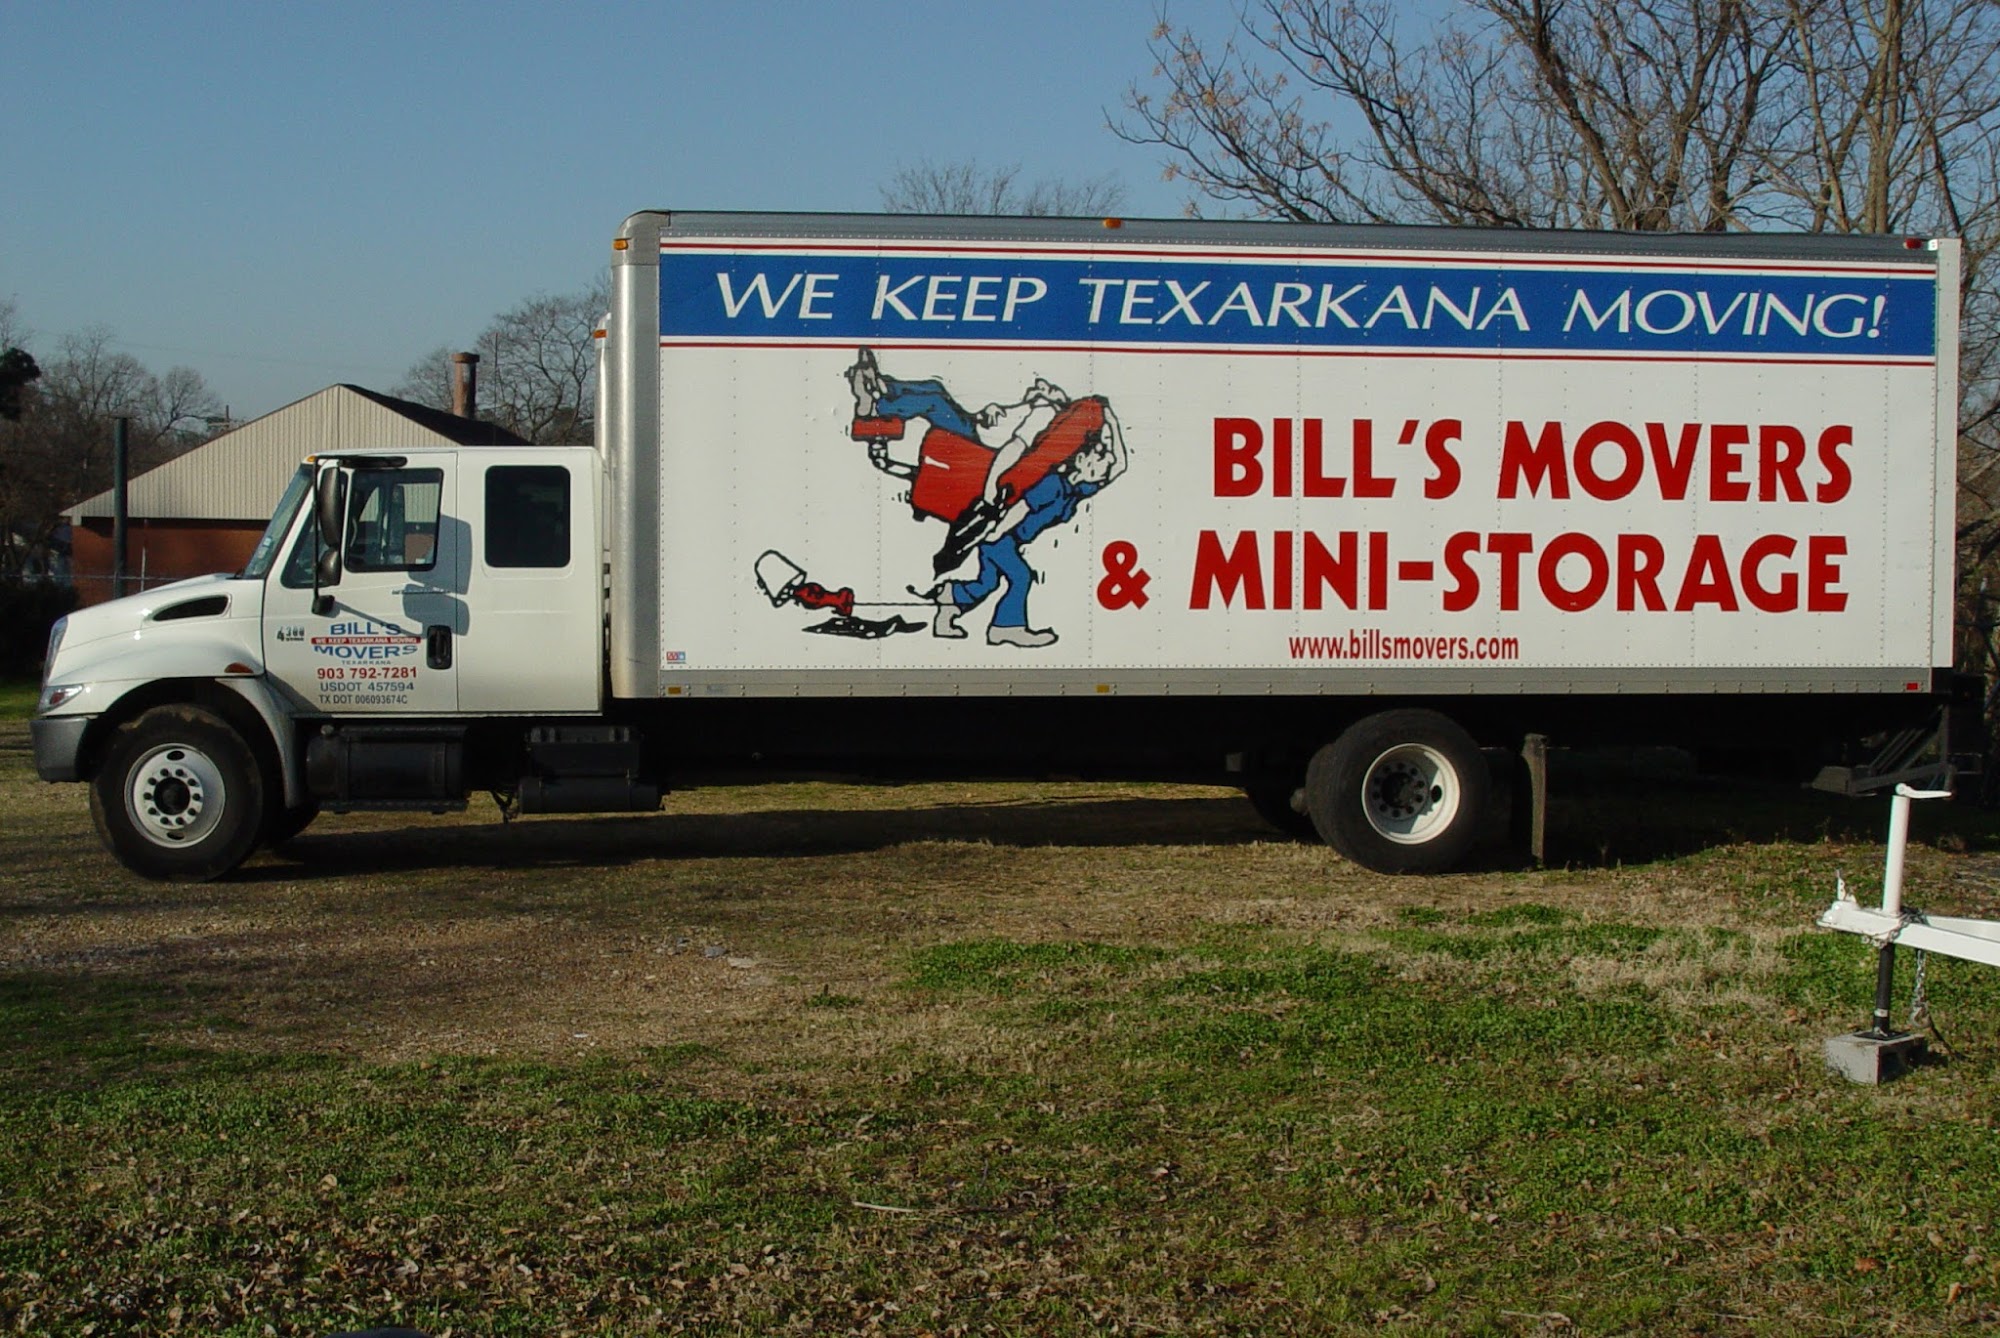 Bill's Movers